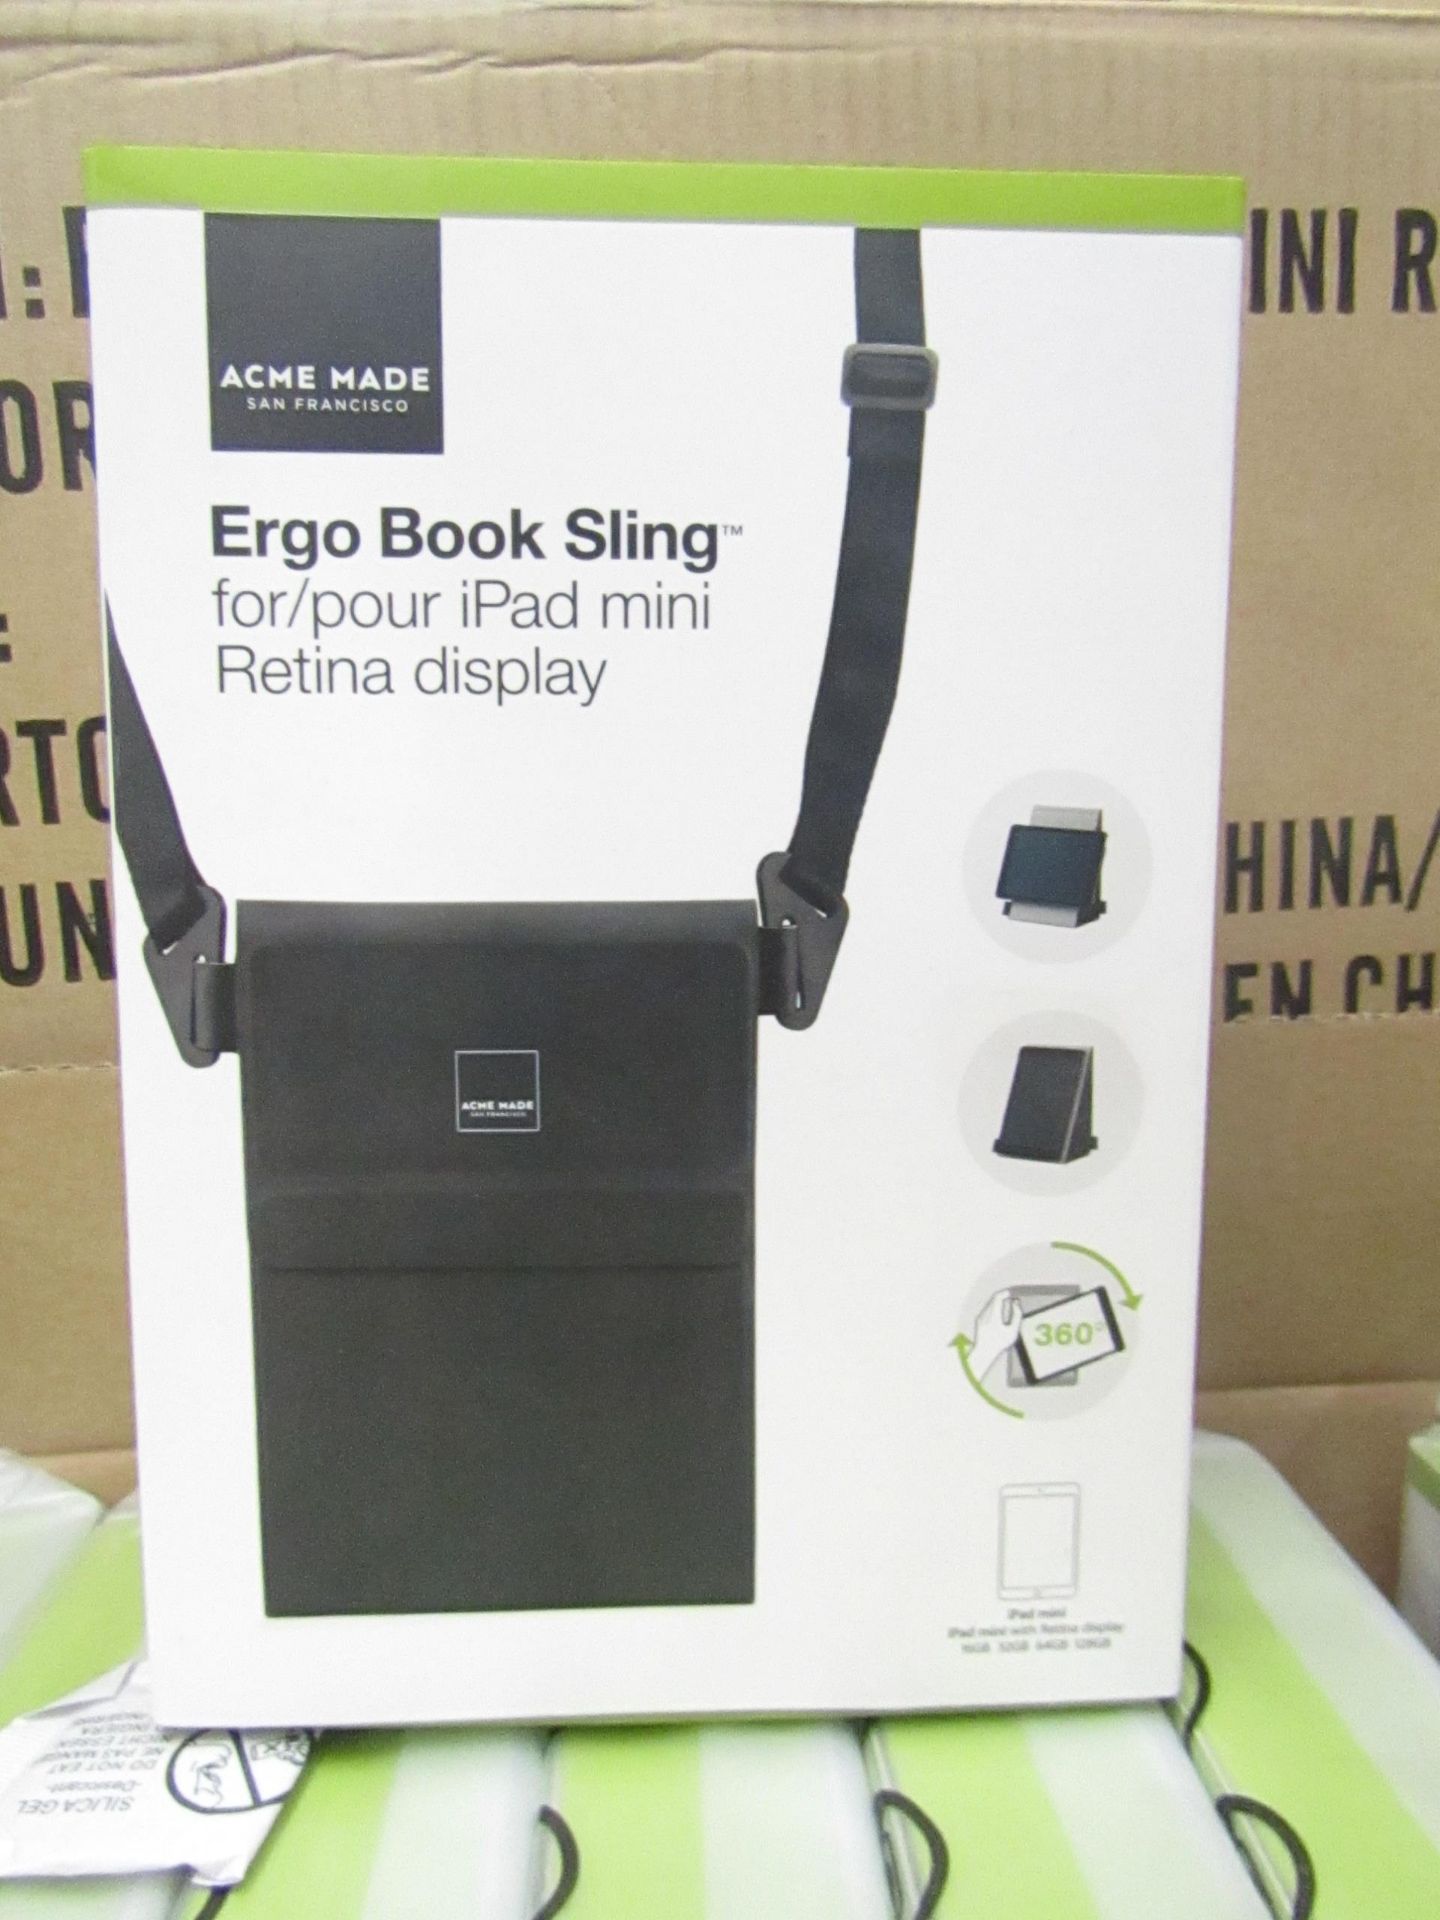 10 x Acme Made Ergo Book Sling Cases for iPad Mini, new